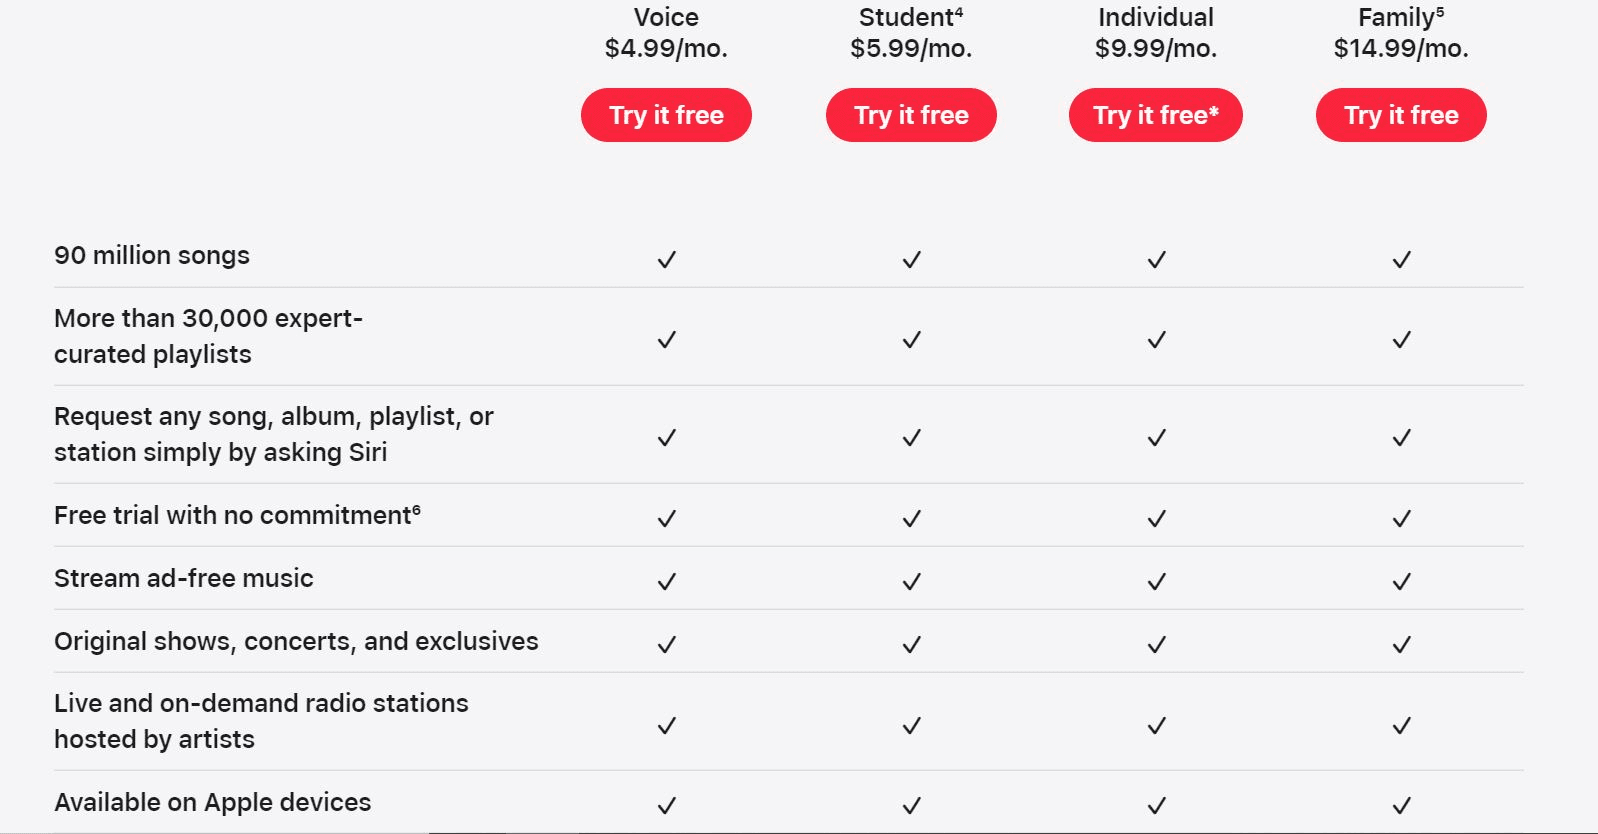 Apple Music plans and prices